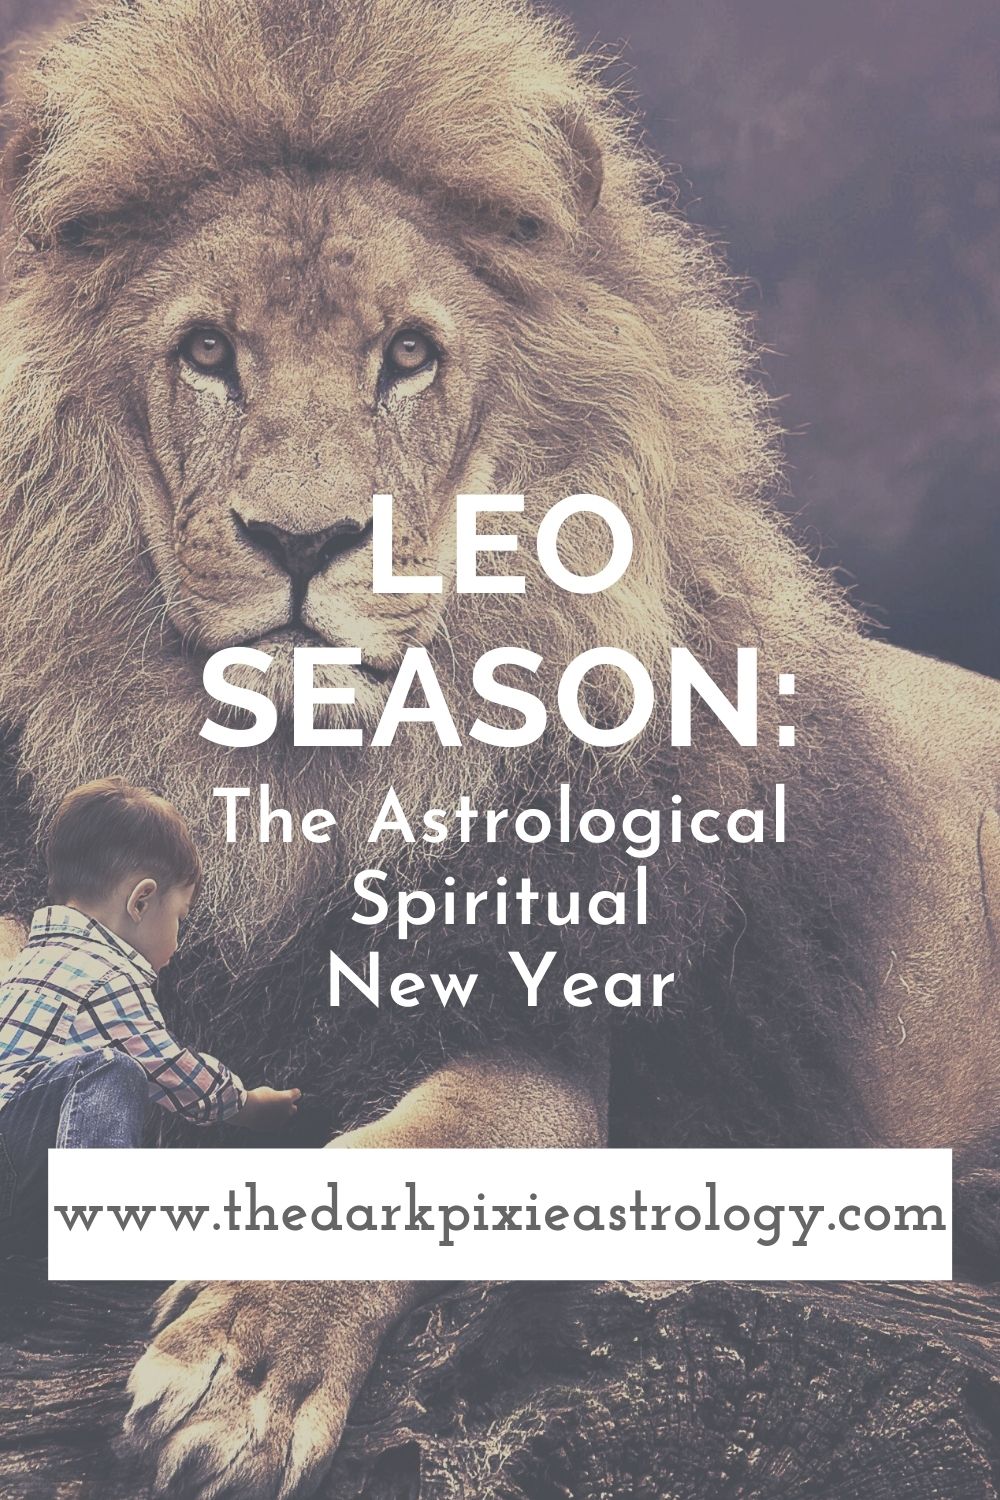 Leo Season: The Astrological Spiritual New Year by guest Tirra-Omilade Hargrow for The Dark Pixie Astrology